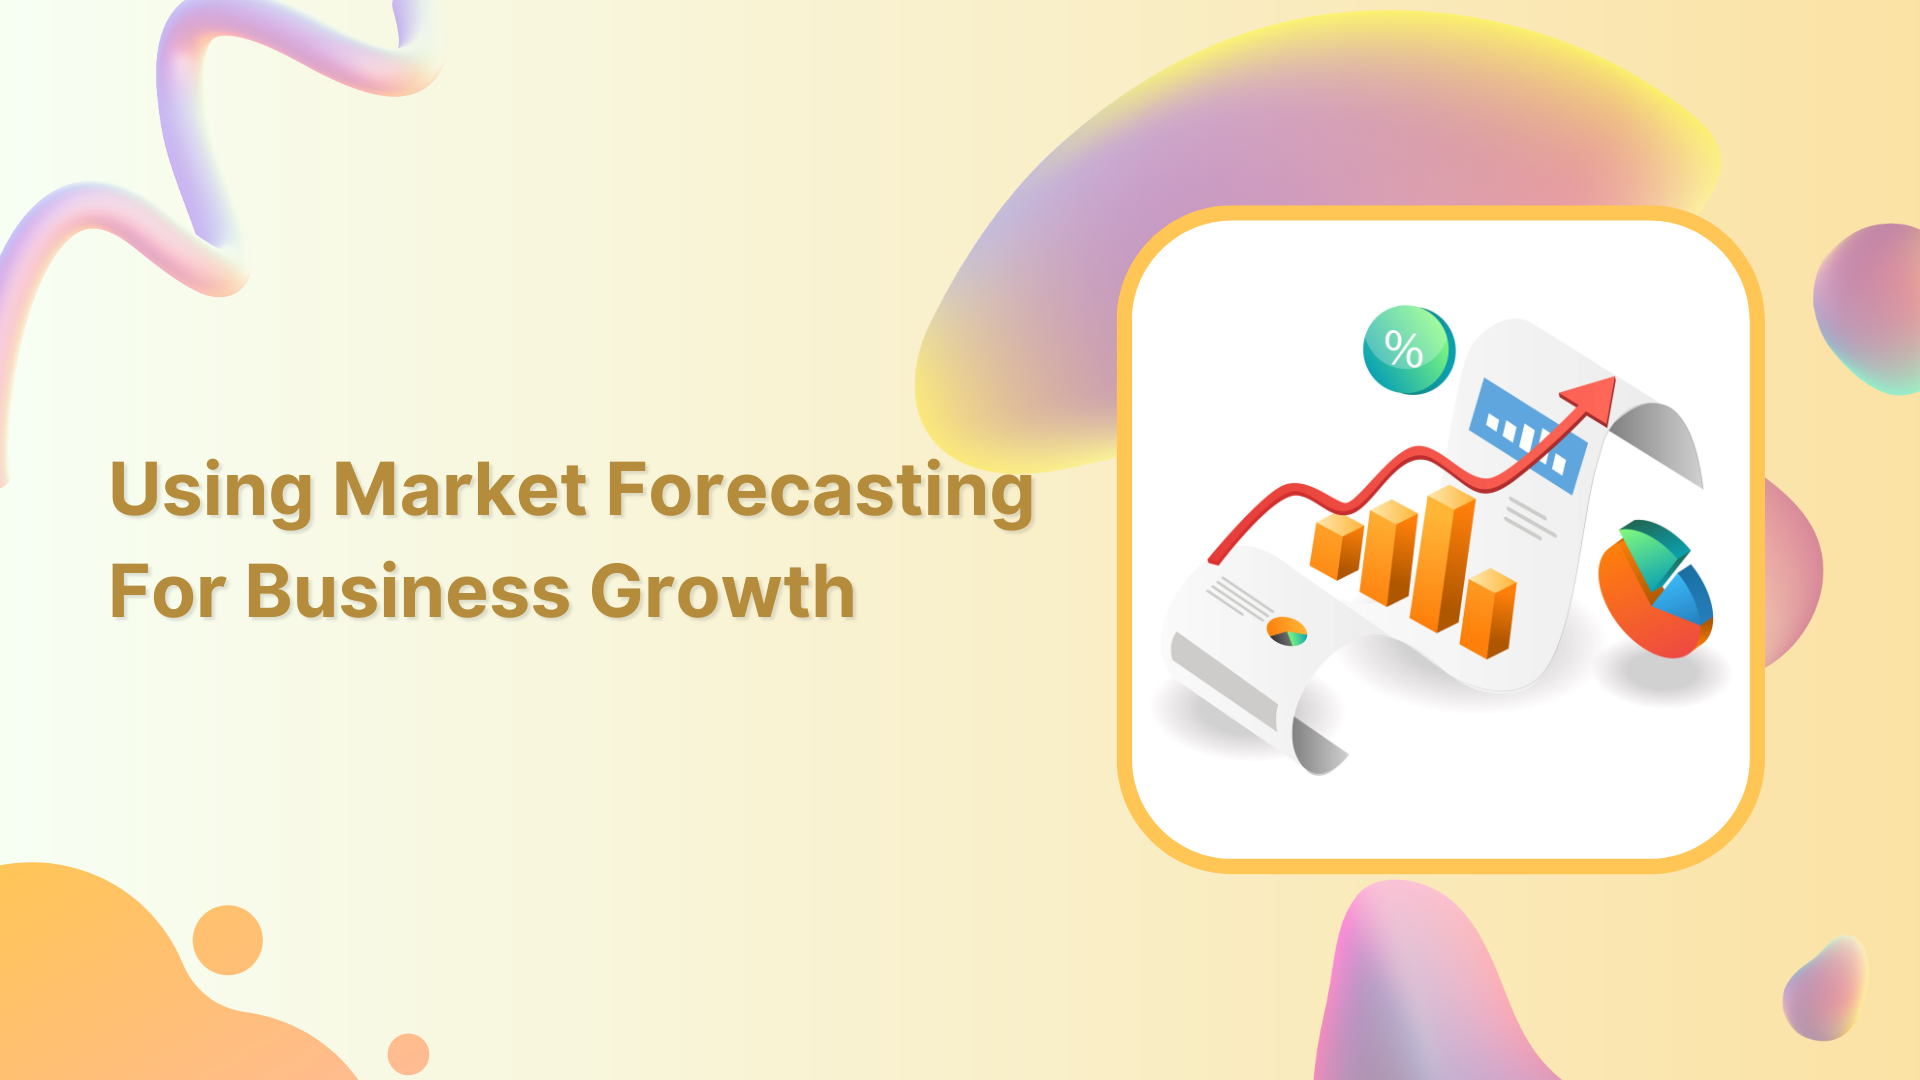 A Complete Guide On Using Market Forecasting For Growth